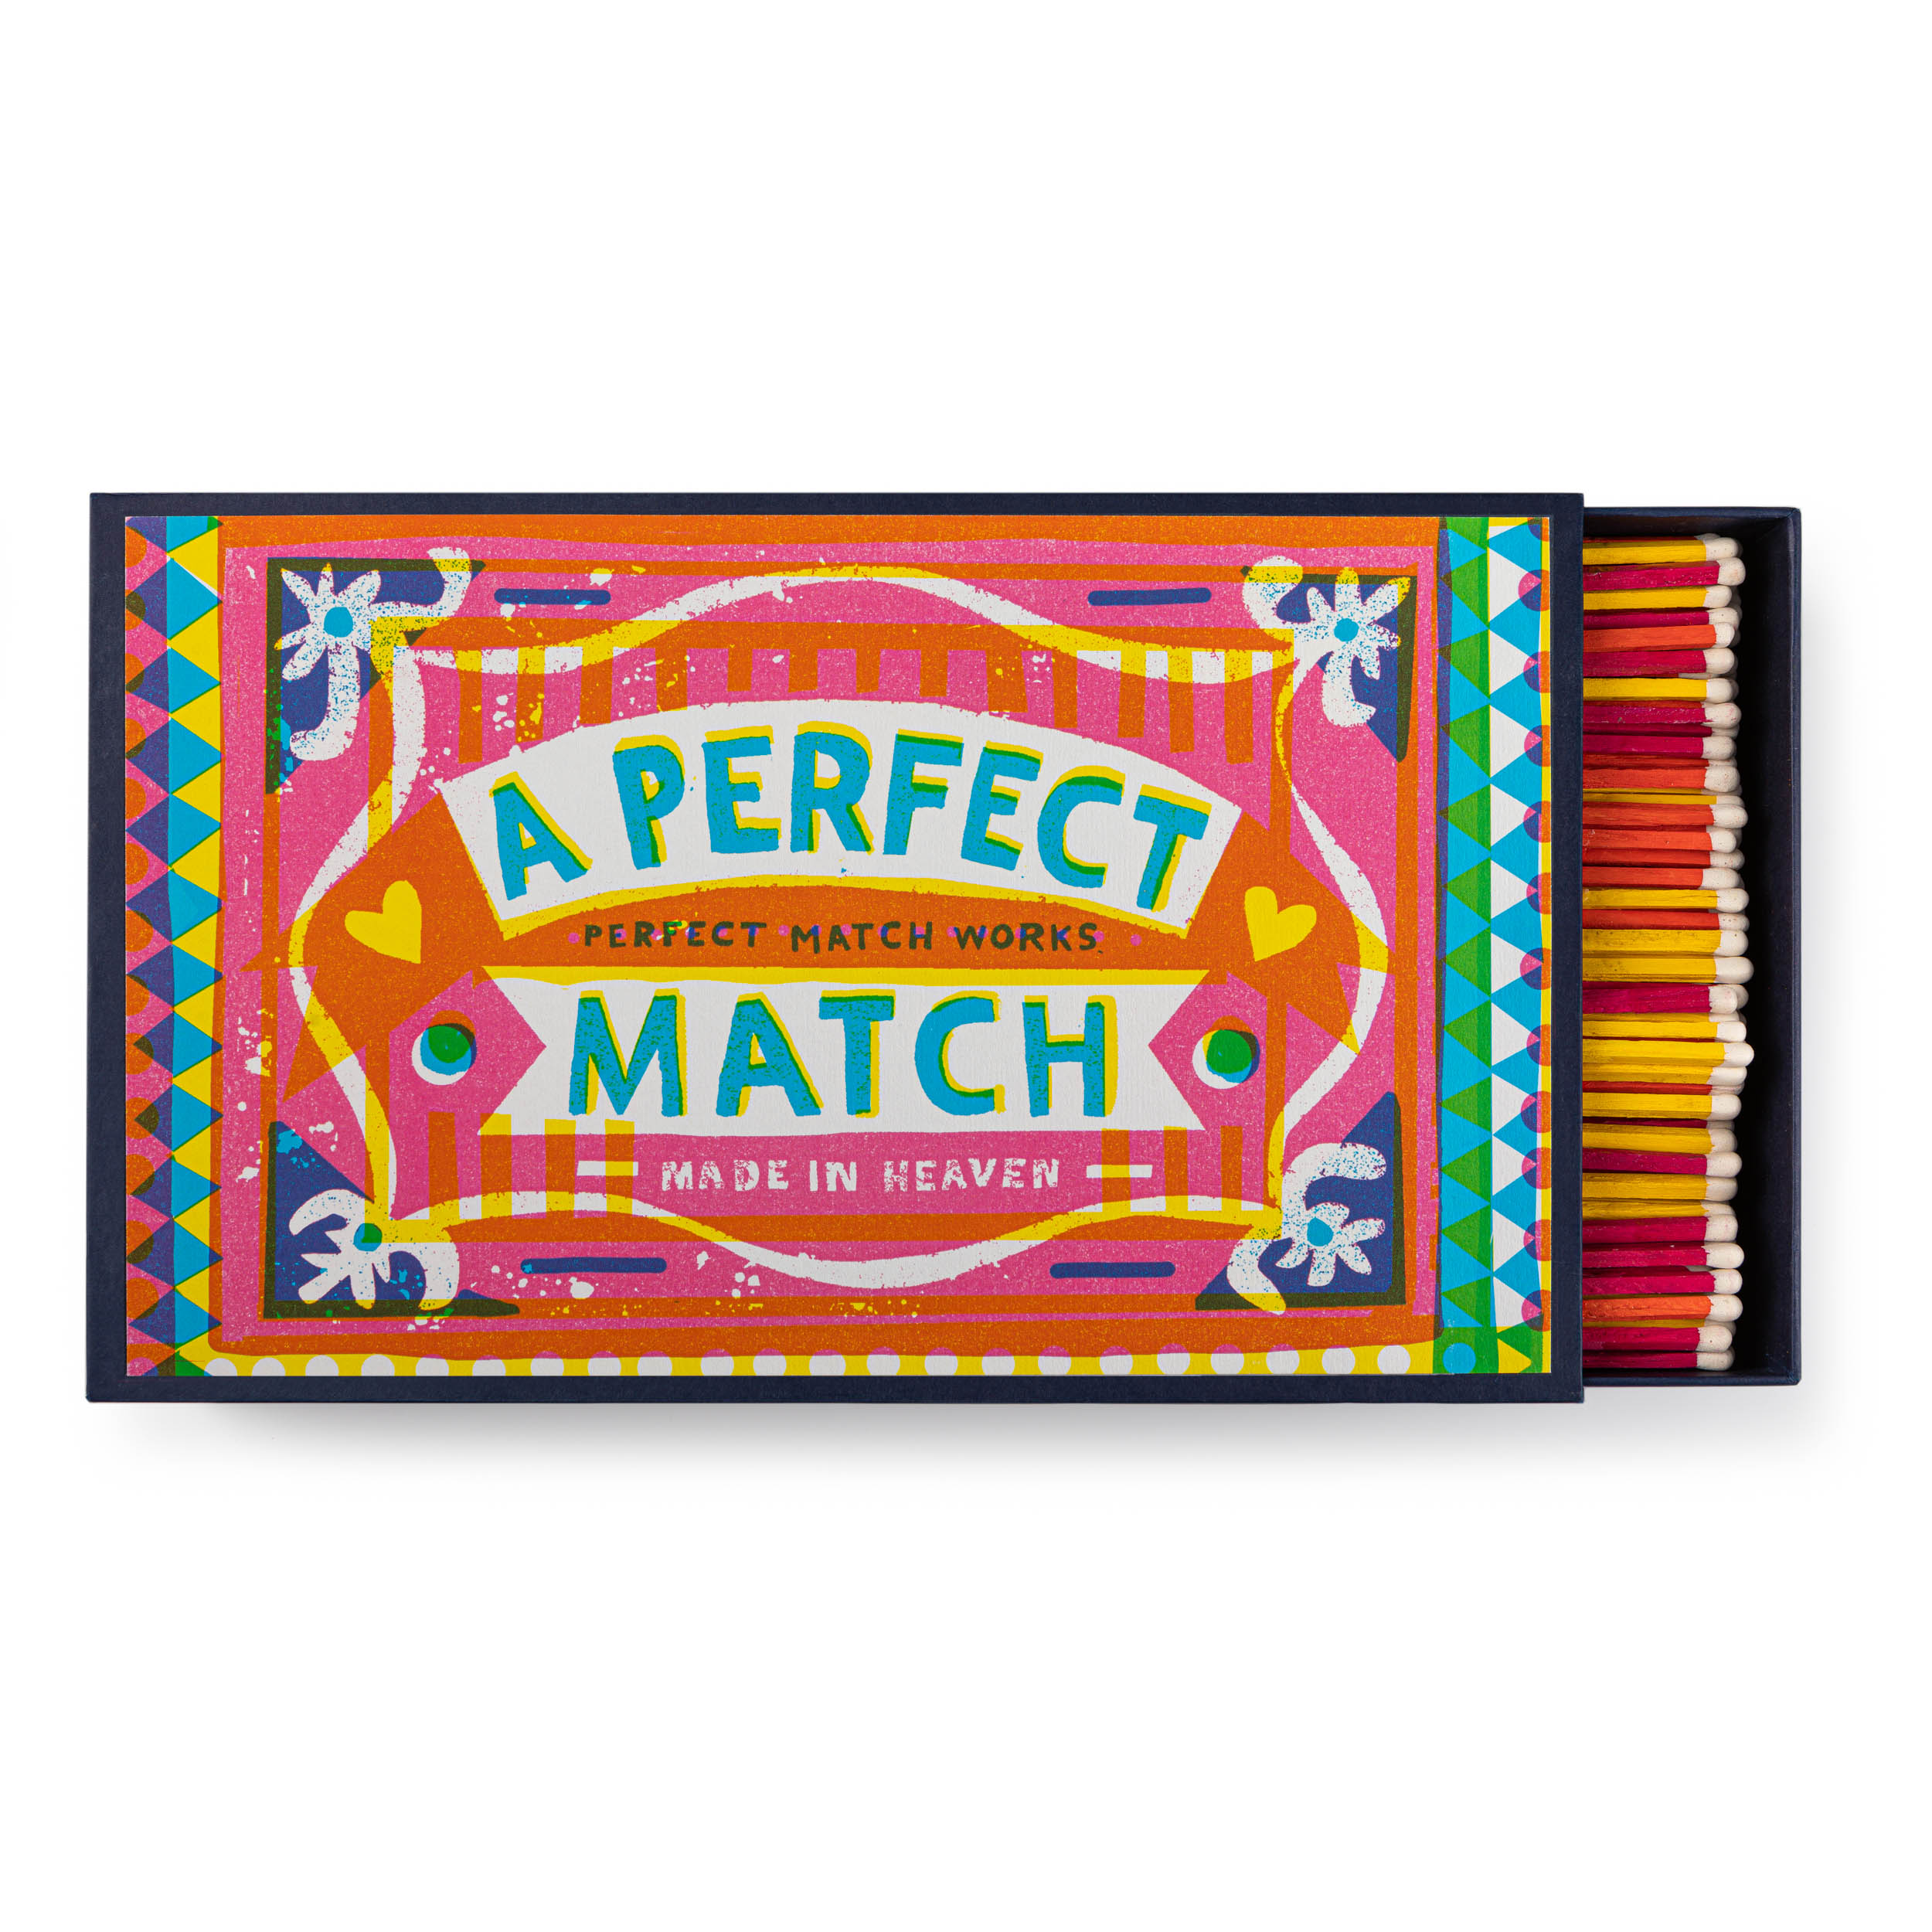 A Perfect Match - Giant Matchboxes - The Printed Peanut - from Archivist Gallery 